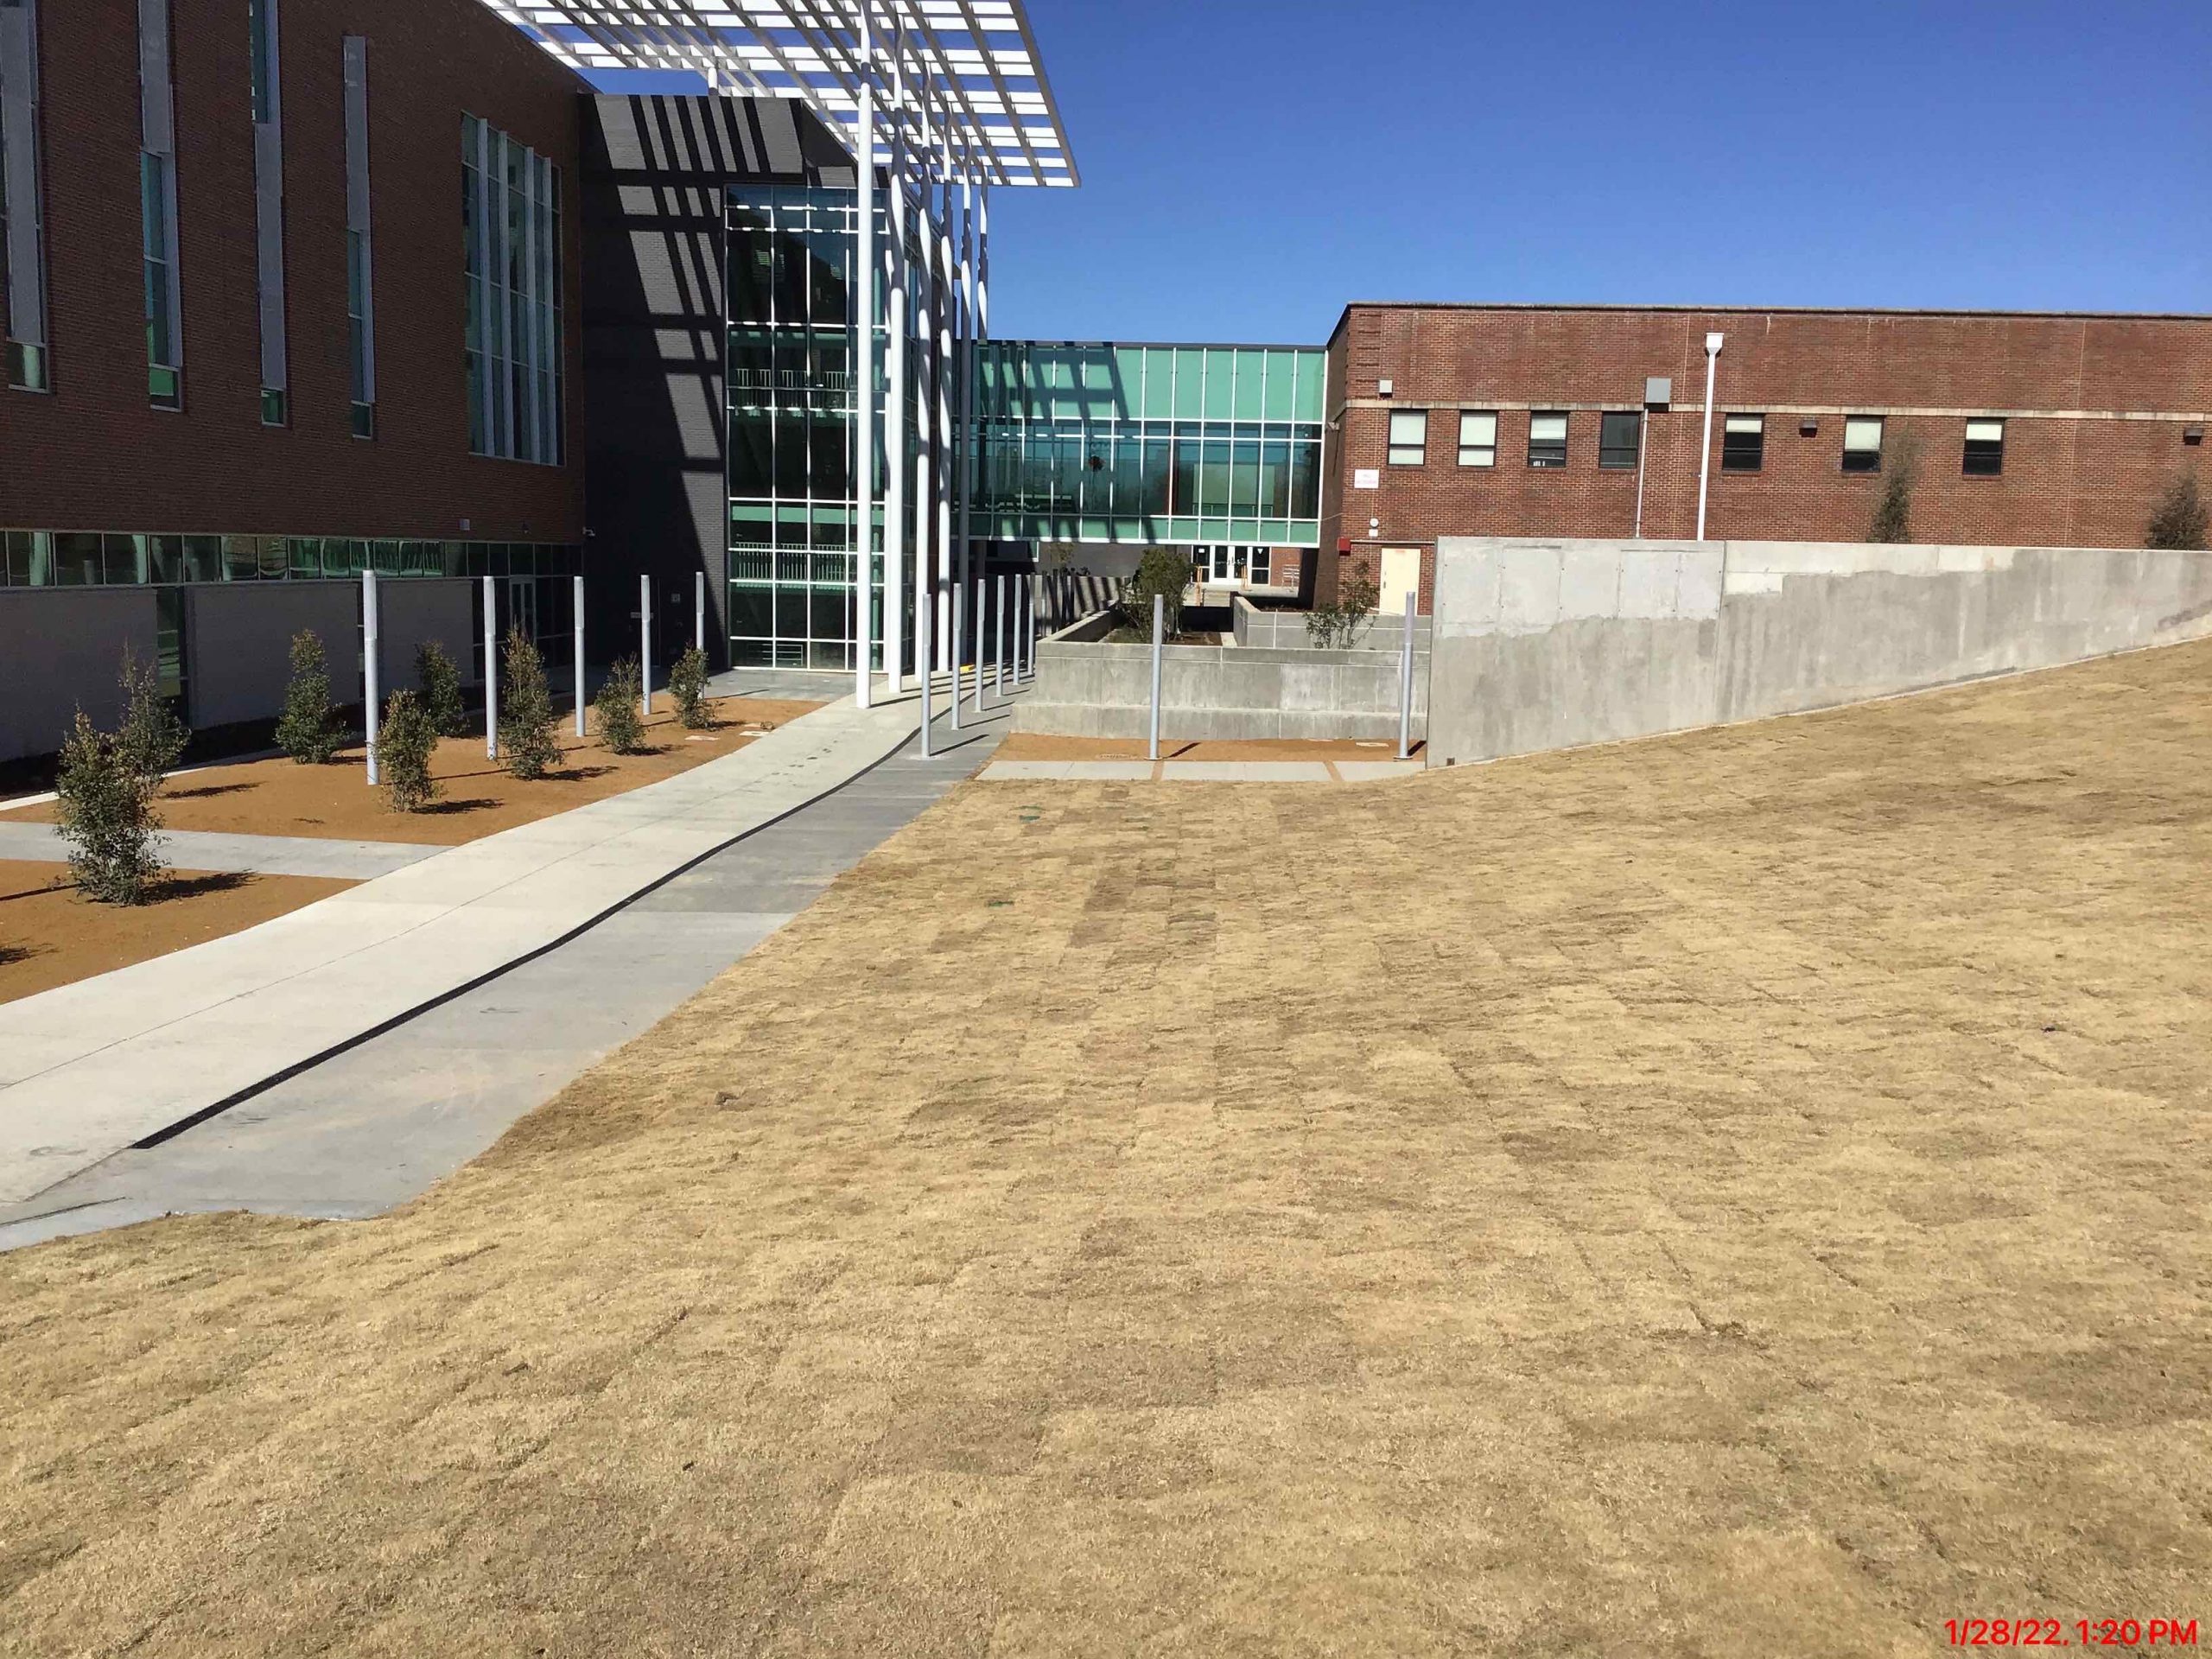 New Science Building image 1